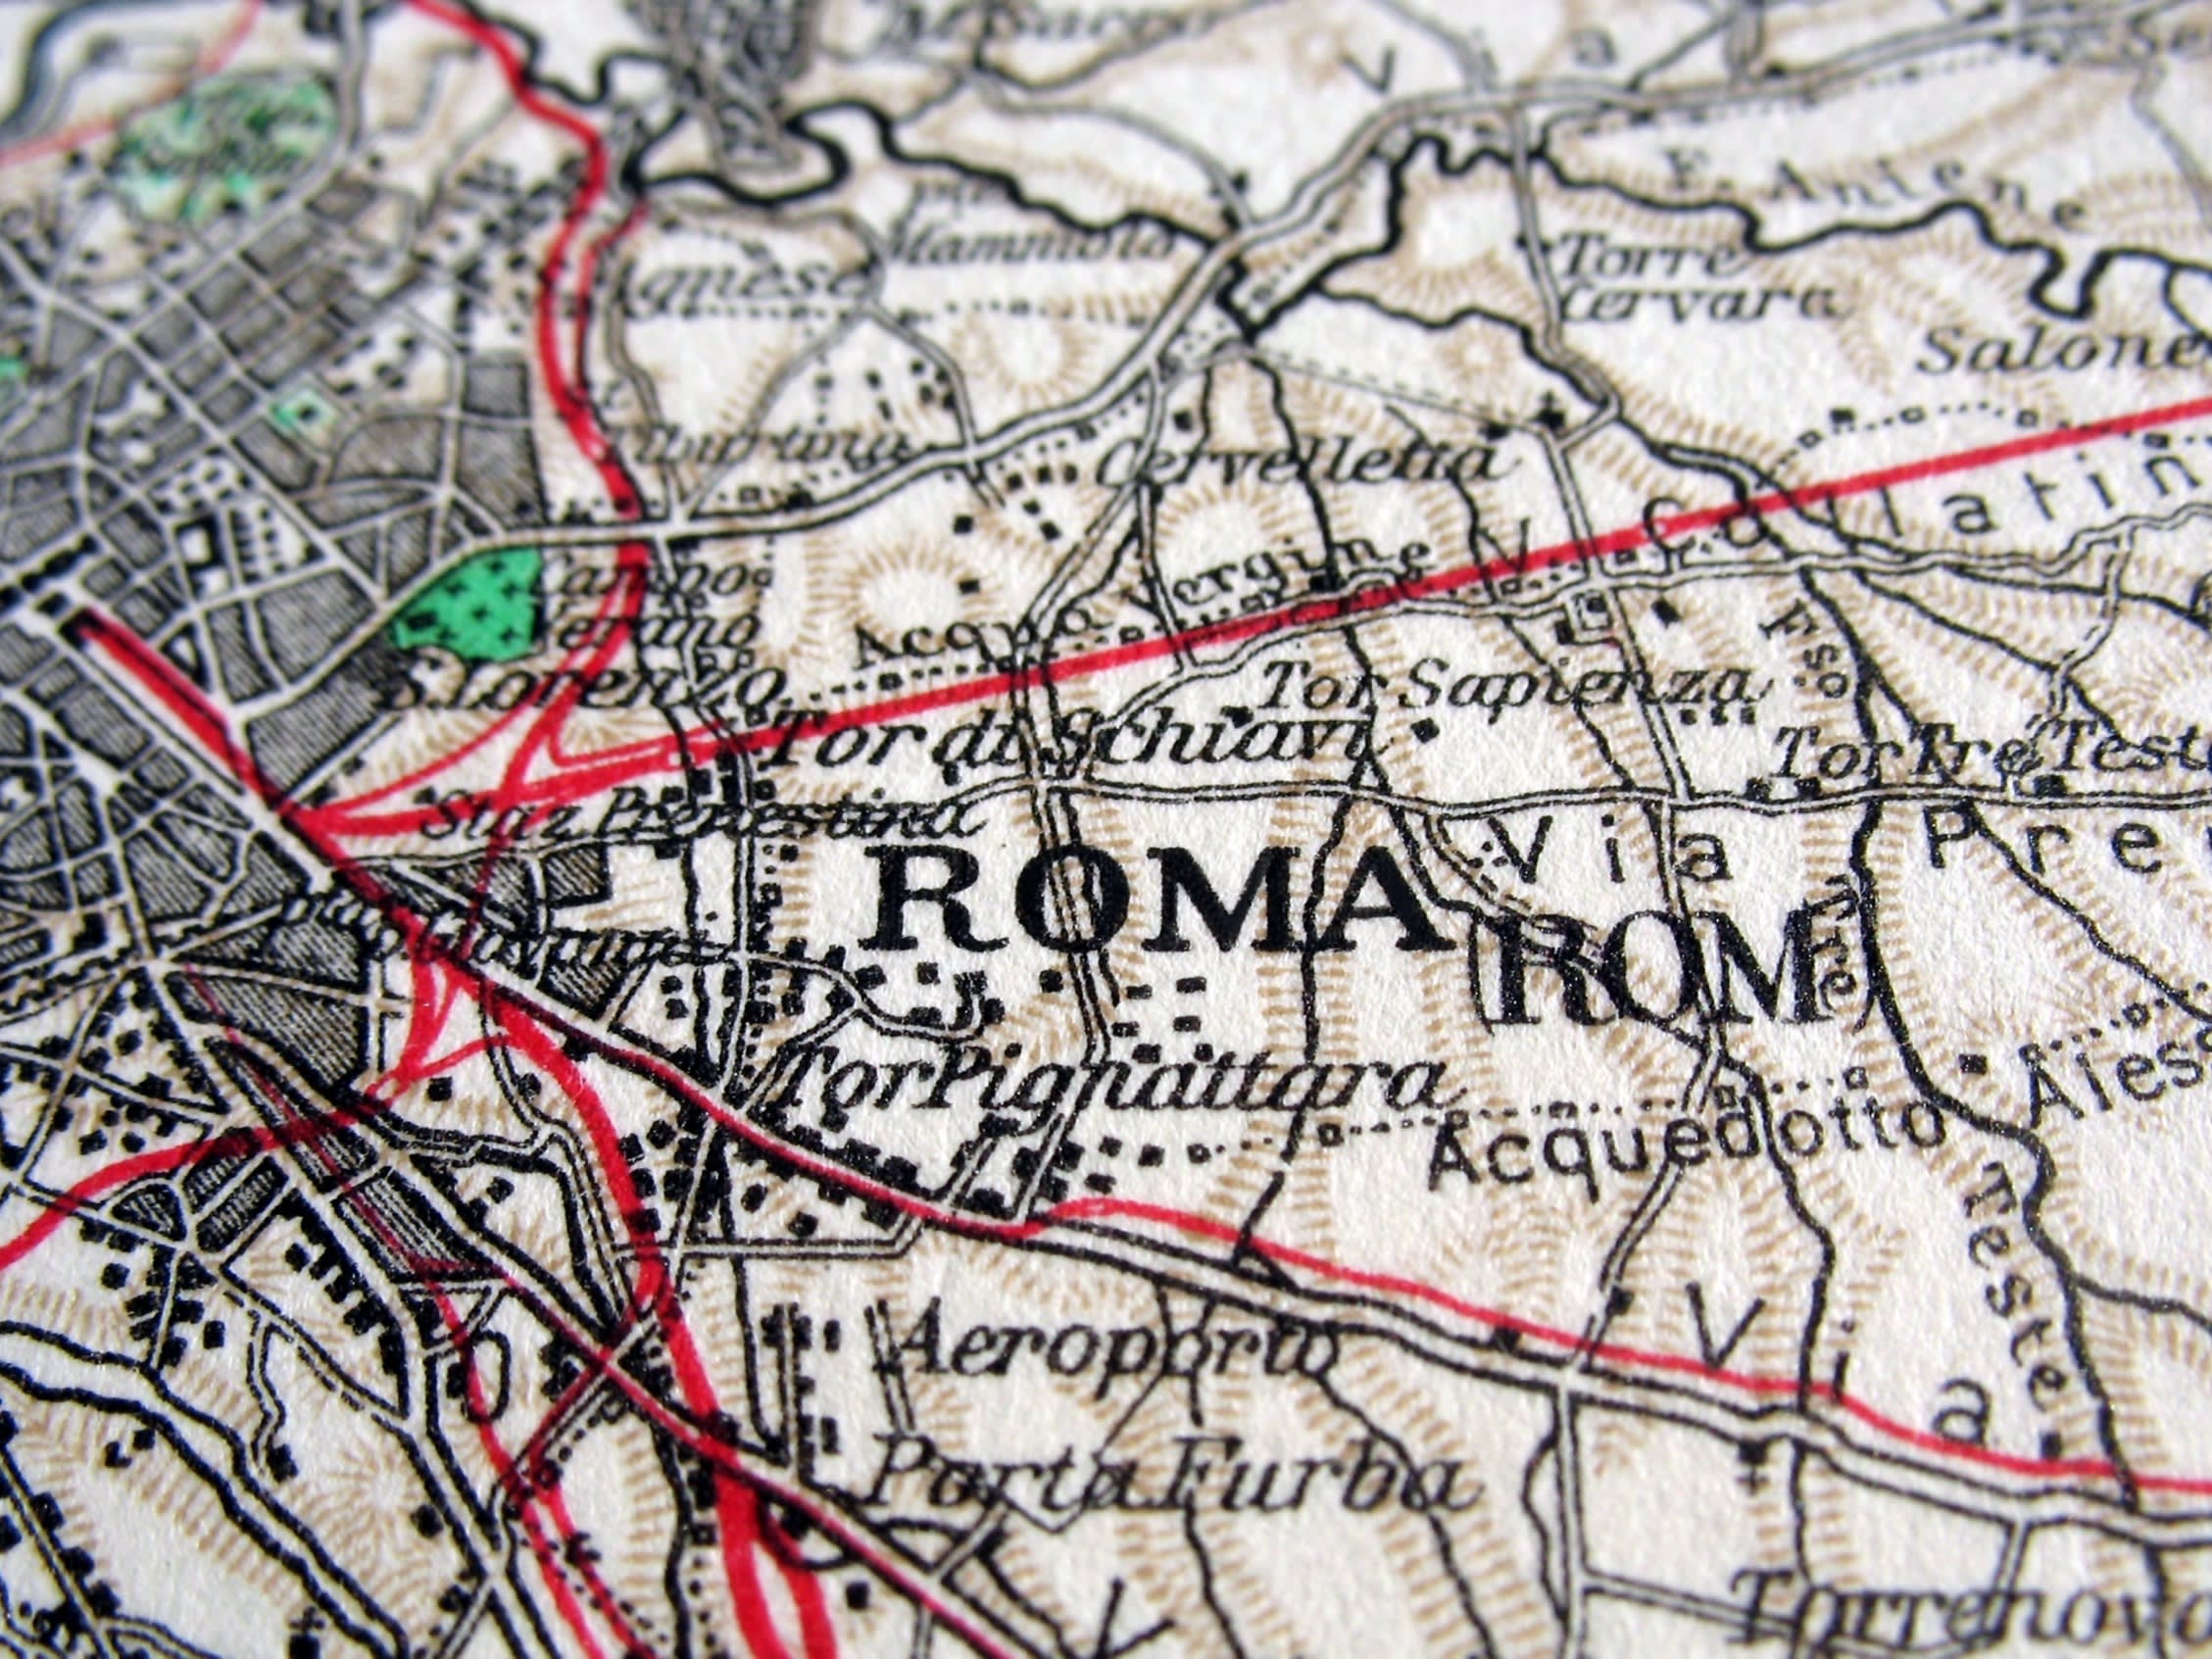 A vintage back and white map of Italy zoomed in on Rome